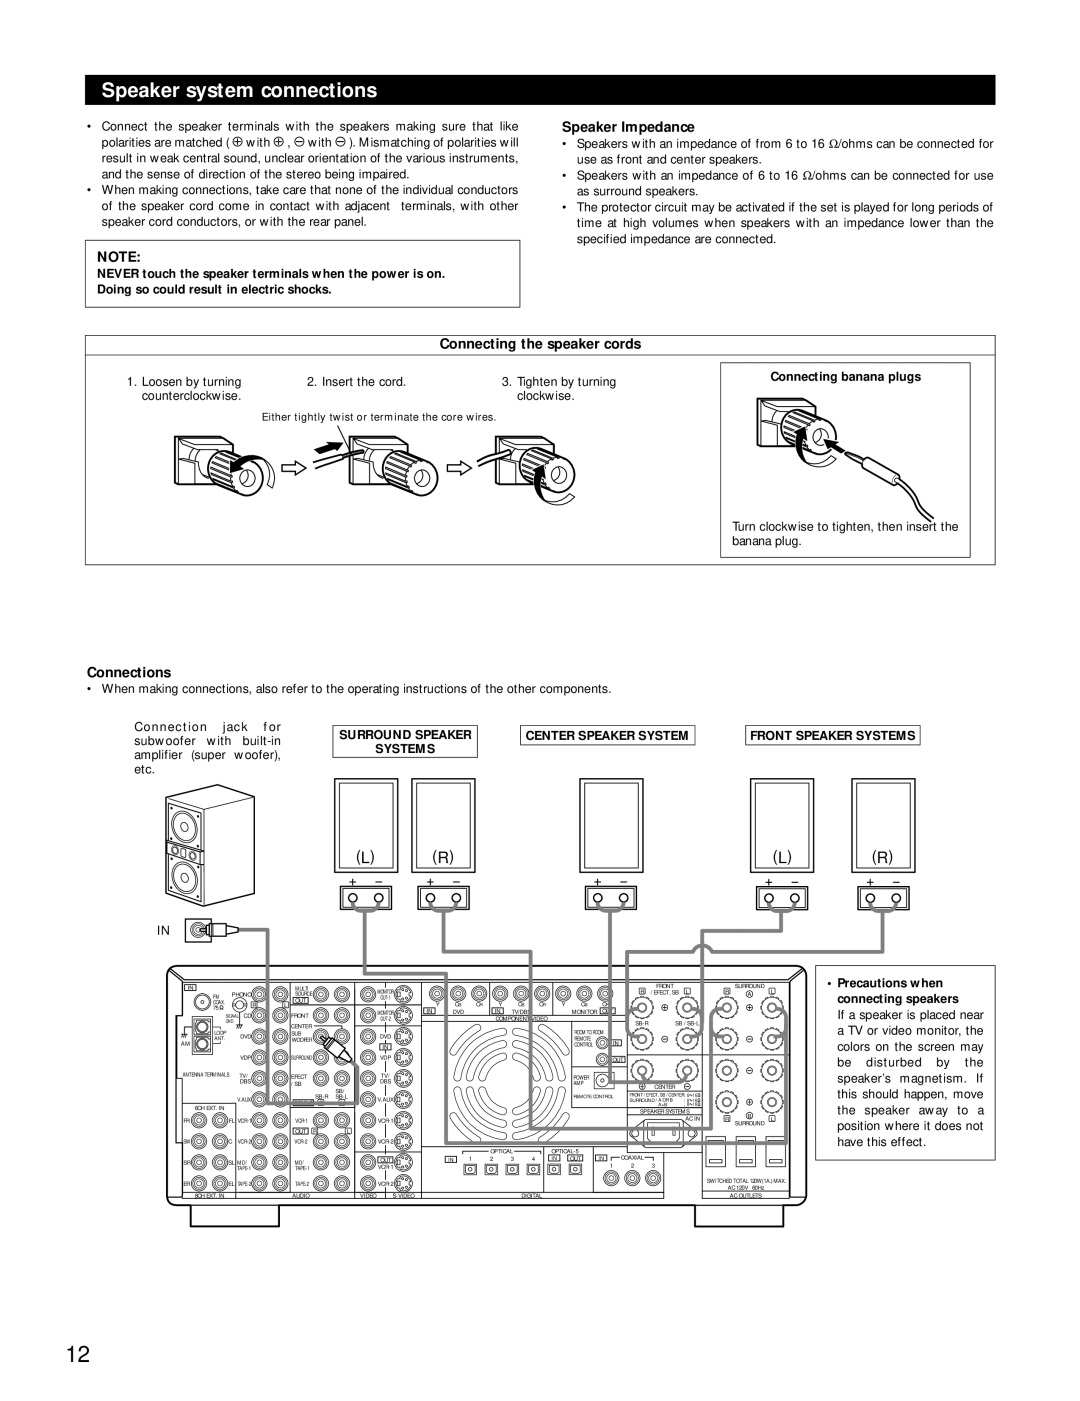 Denon AVR-4800 manual Speaker system connections, Speaker Impedance, Connecting the speaker cords, Connections, Systems 